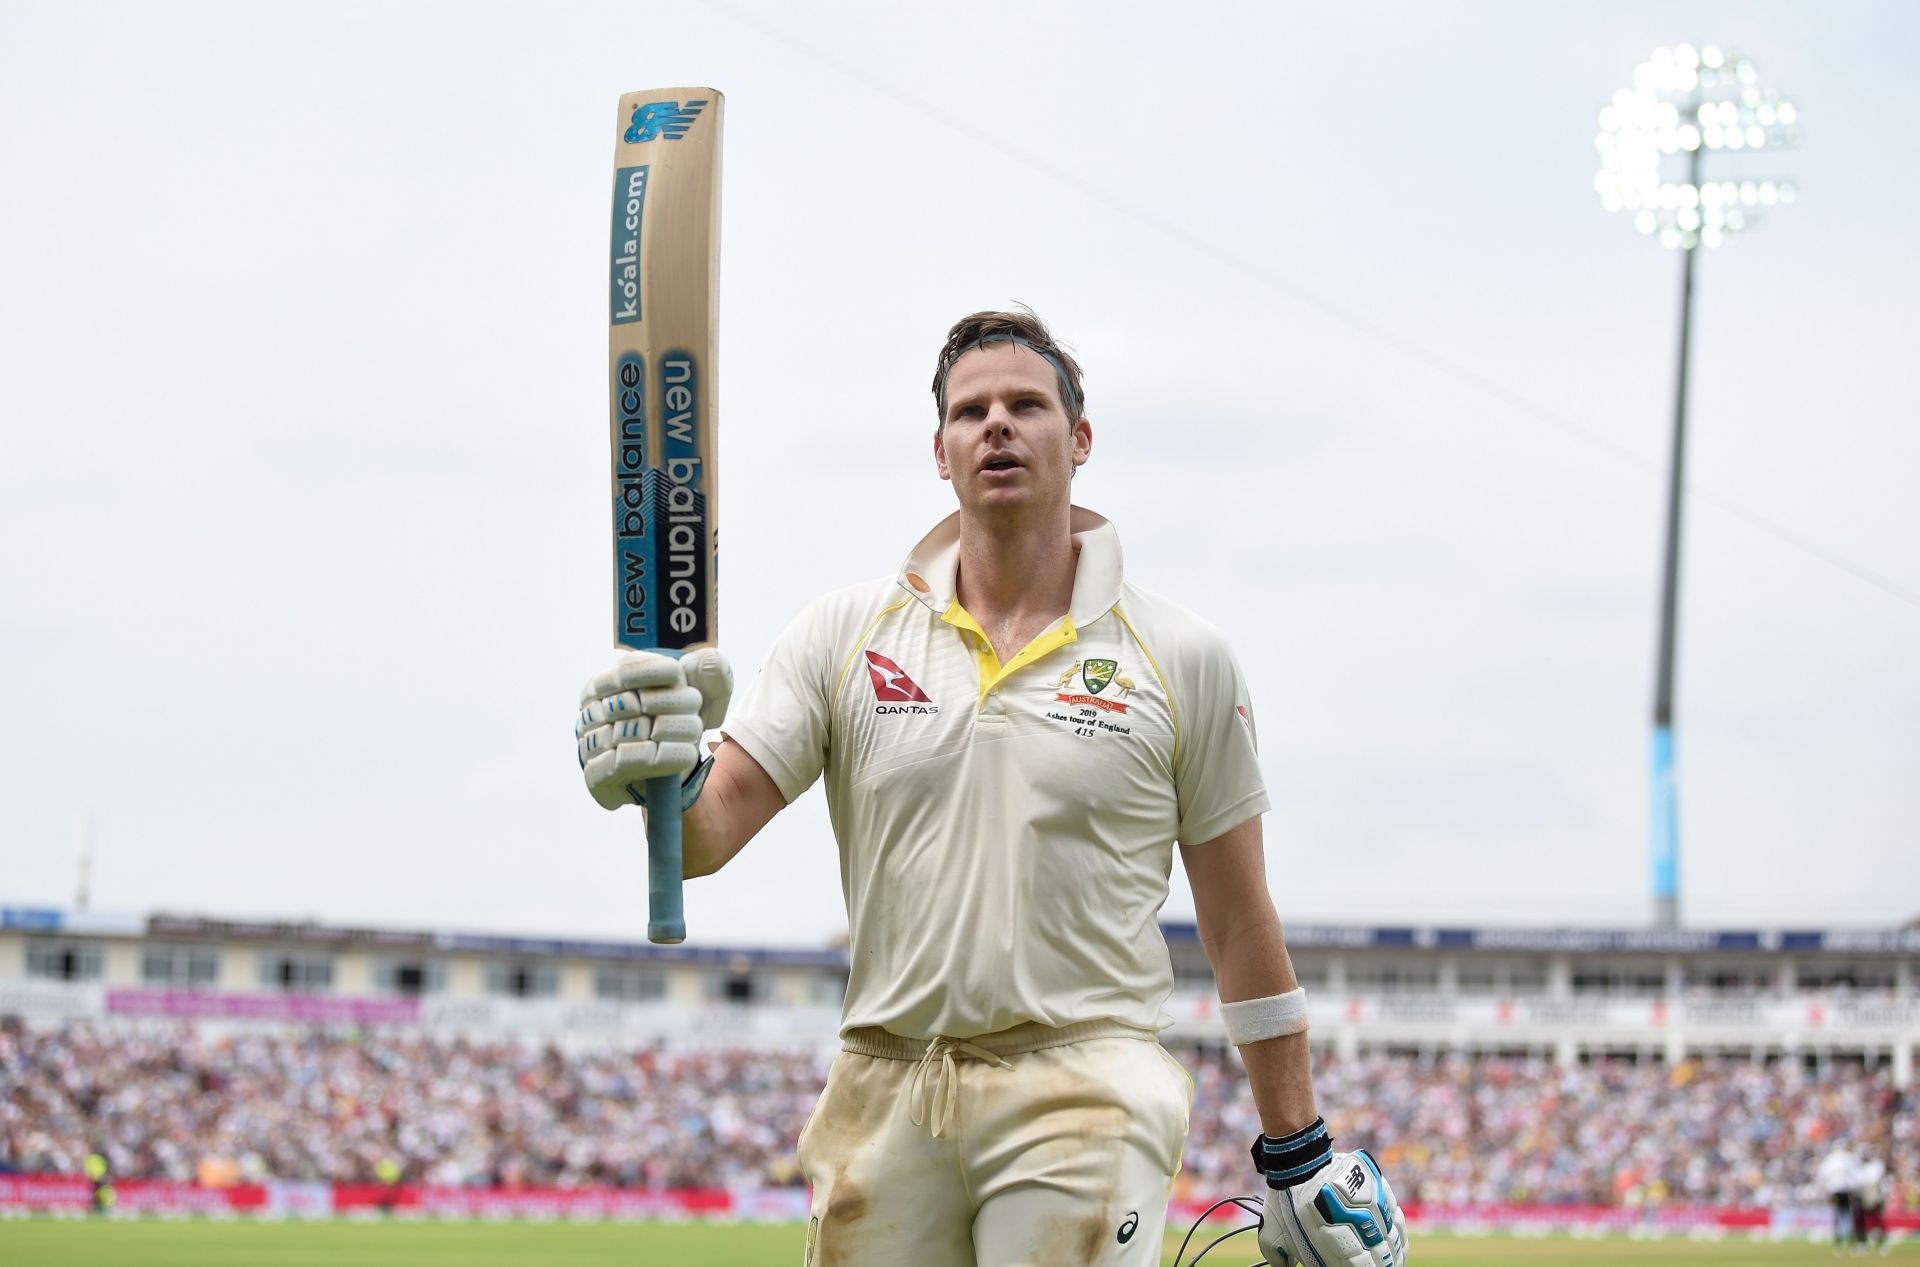 A test in century during the 2019 Ashes in England